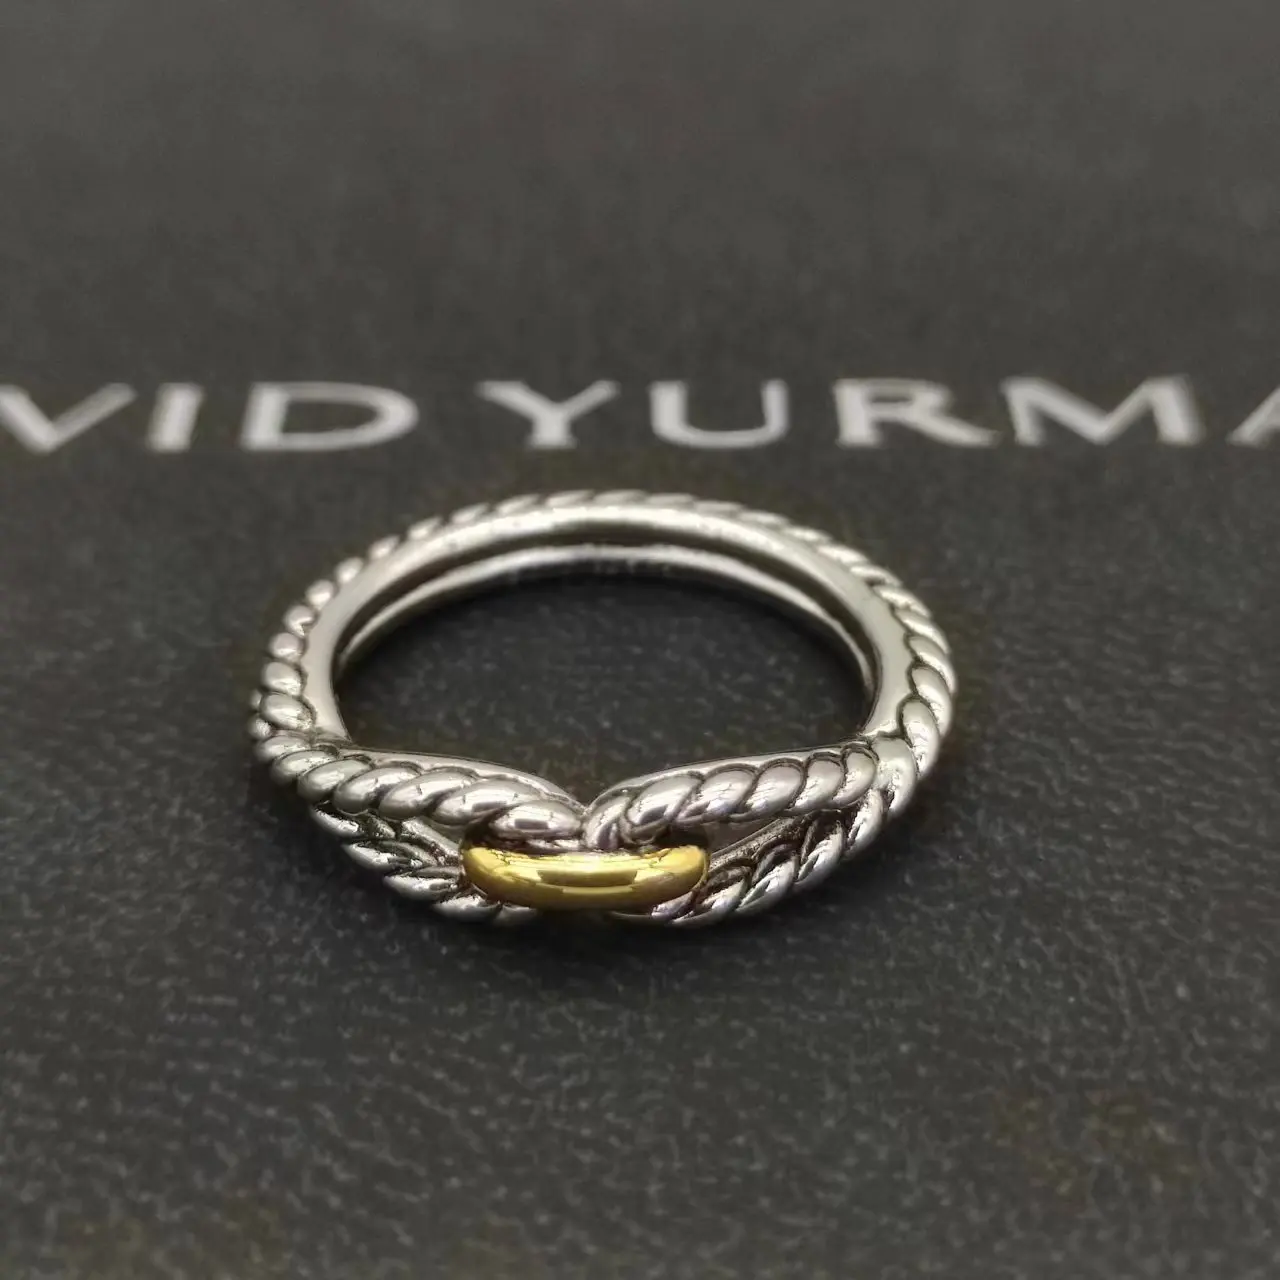 

HSC David Yurman Rings Petite Twist Cable Buckle in Silver 925 Plated 18K Yellow Gold with Pavé Diamonds